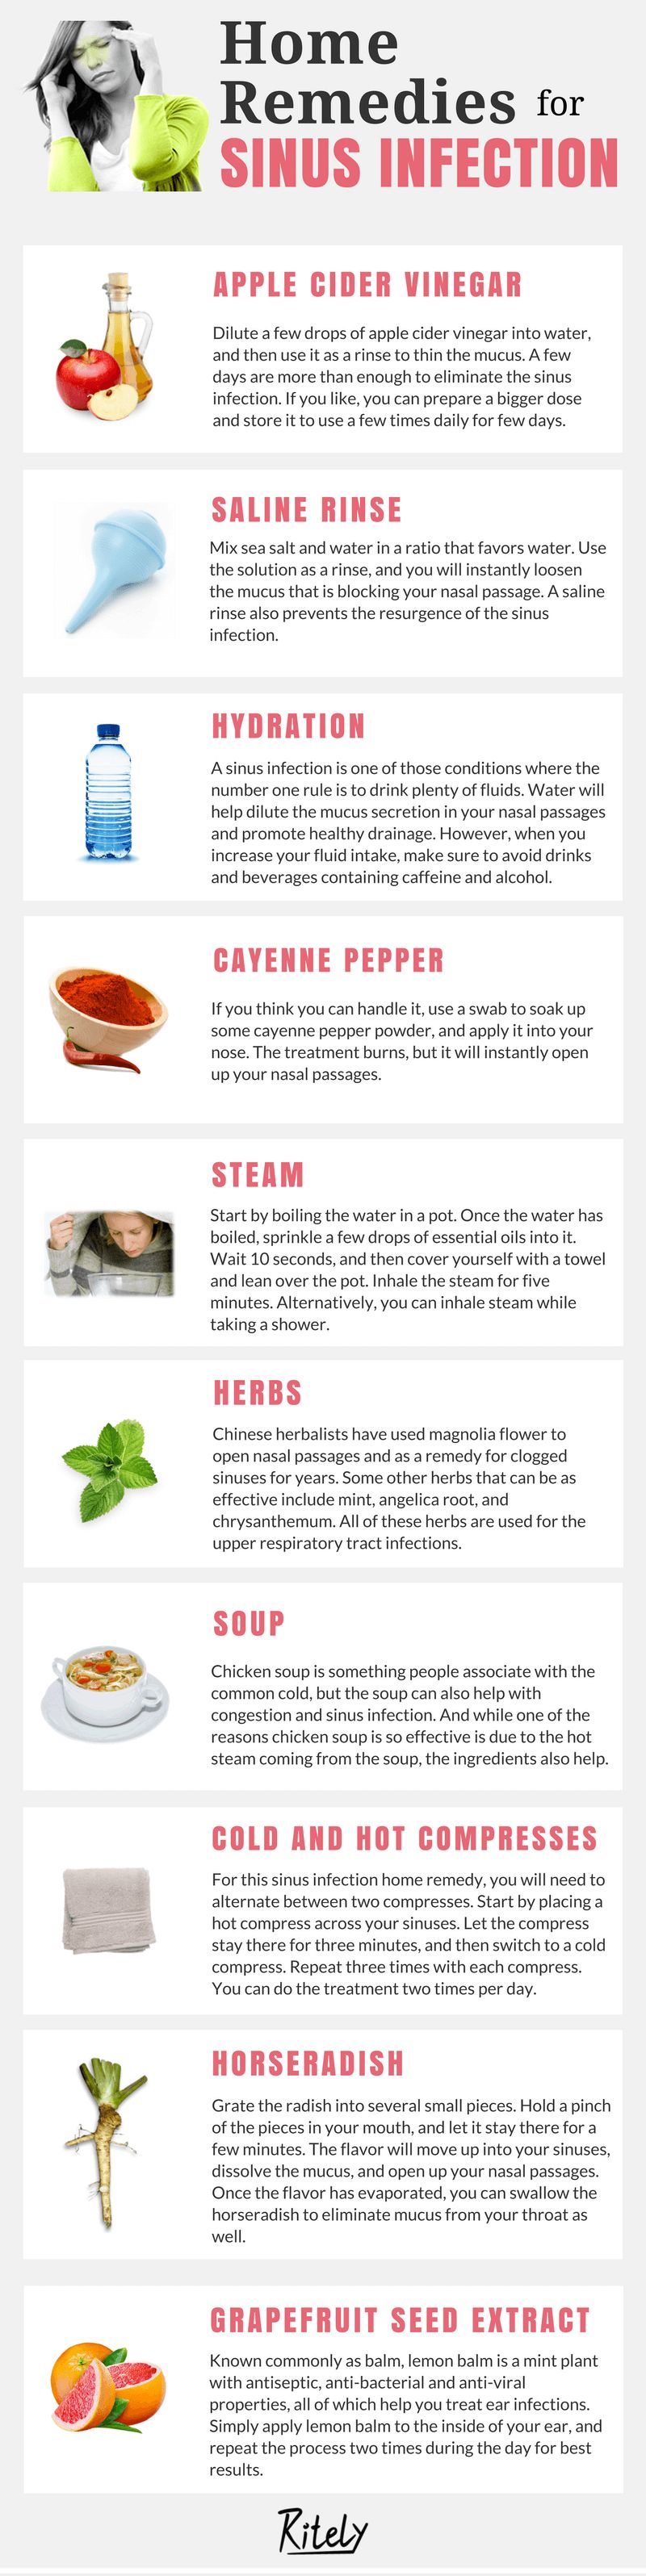 10 Home Remedies for Sinus Infections